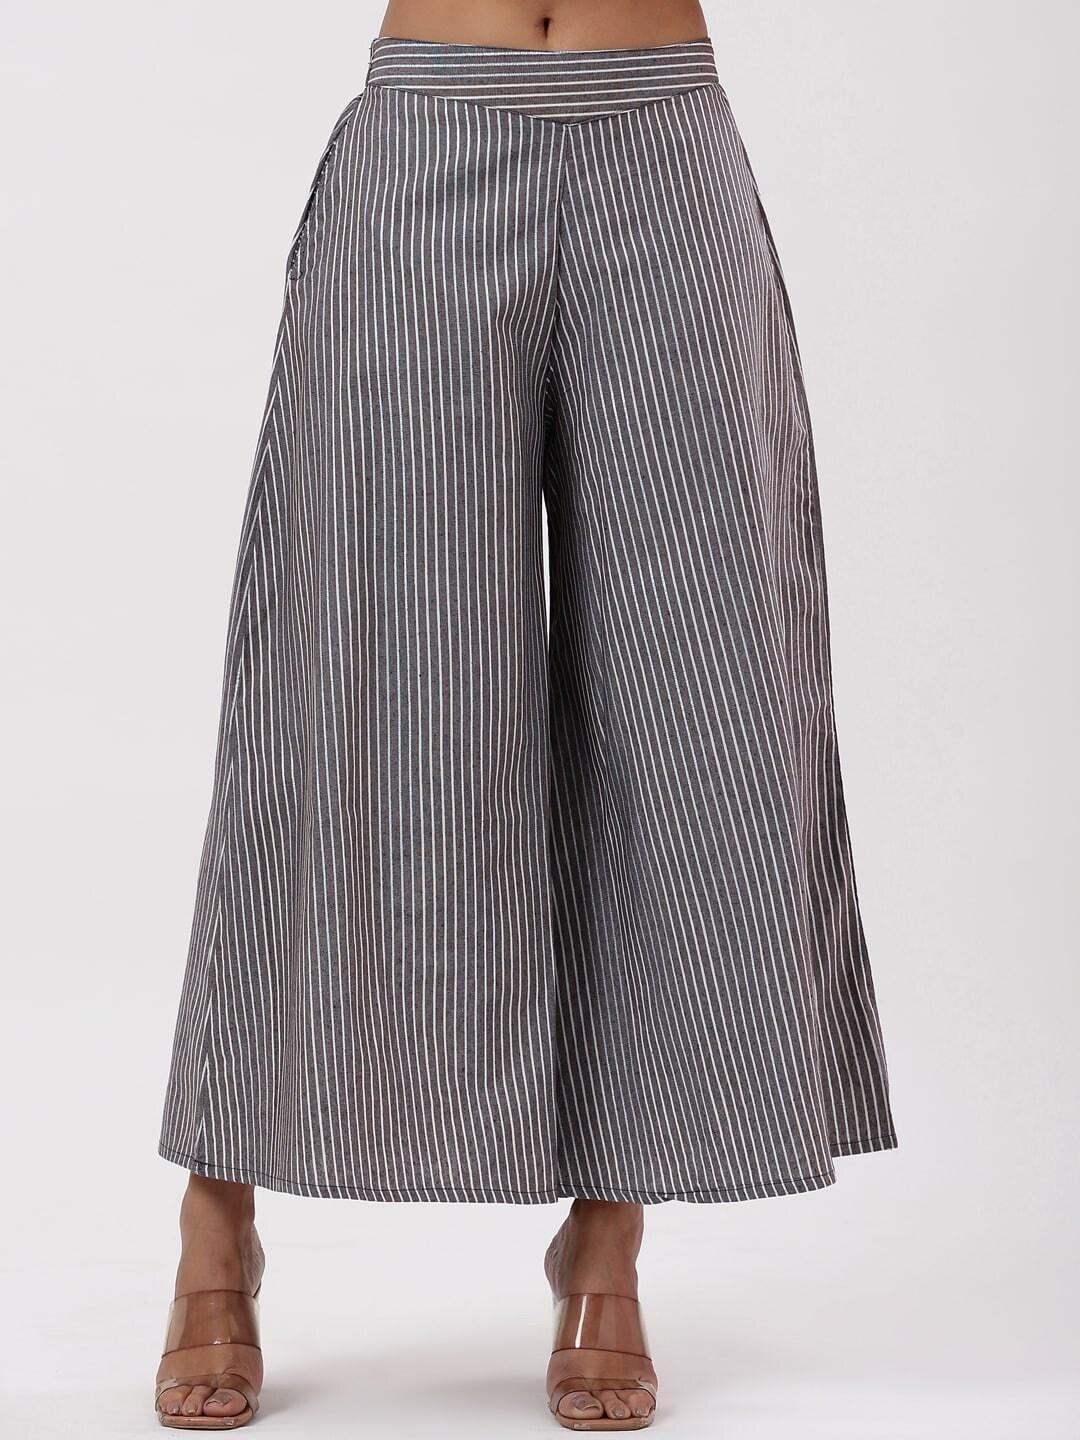 fabriko-women-striped-comfort-flared-high-rise-cotton-culottes-trousers